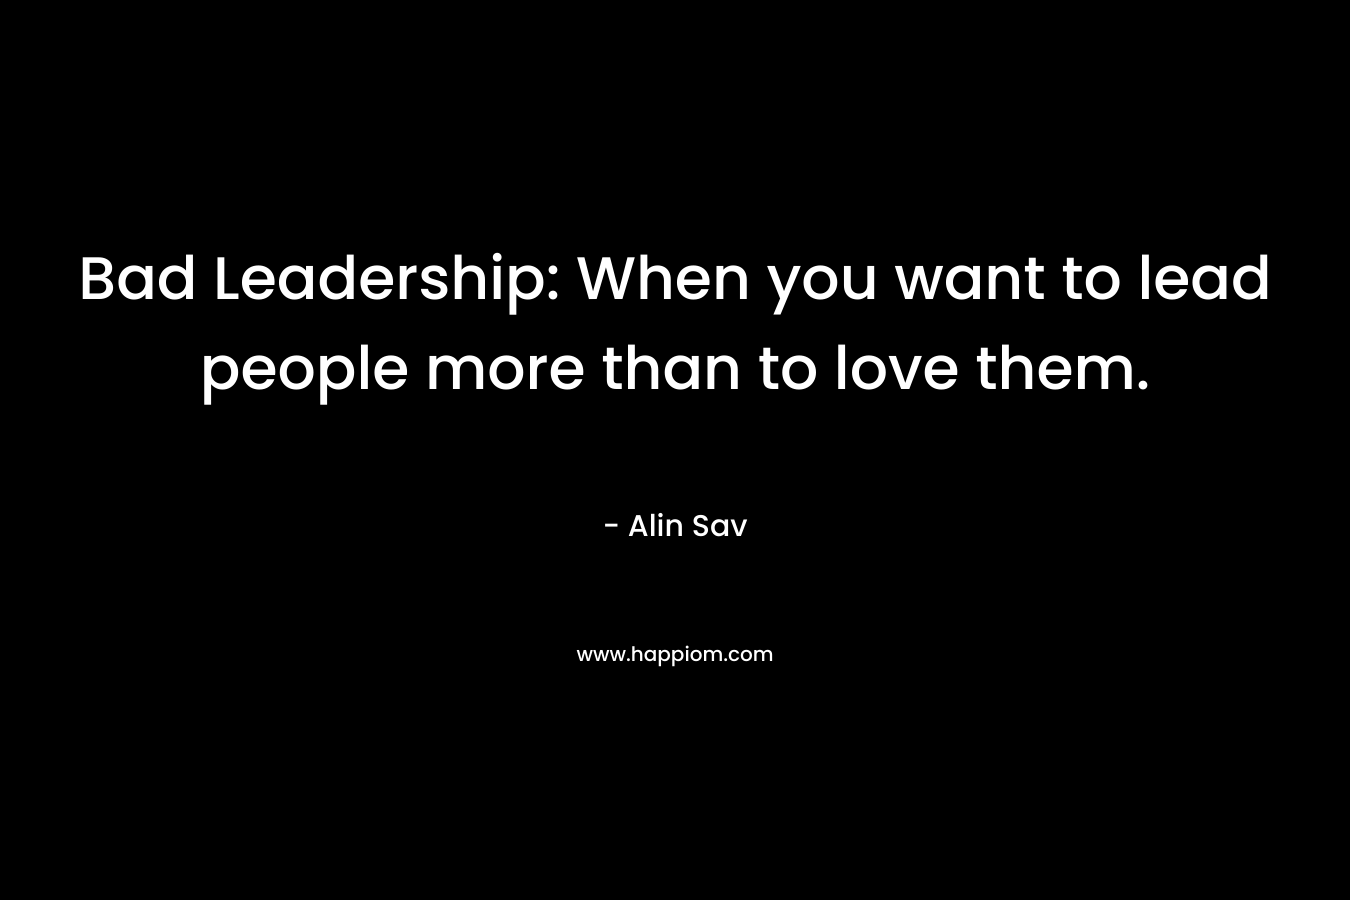 Bad Leadership: When you want to lead people more than to love them.